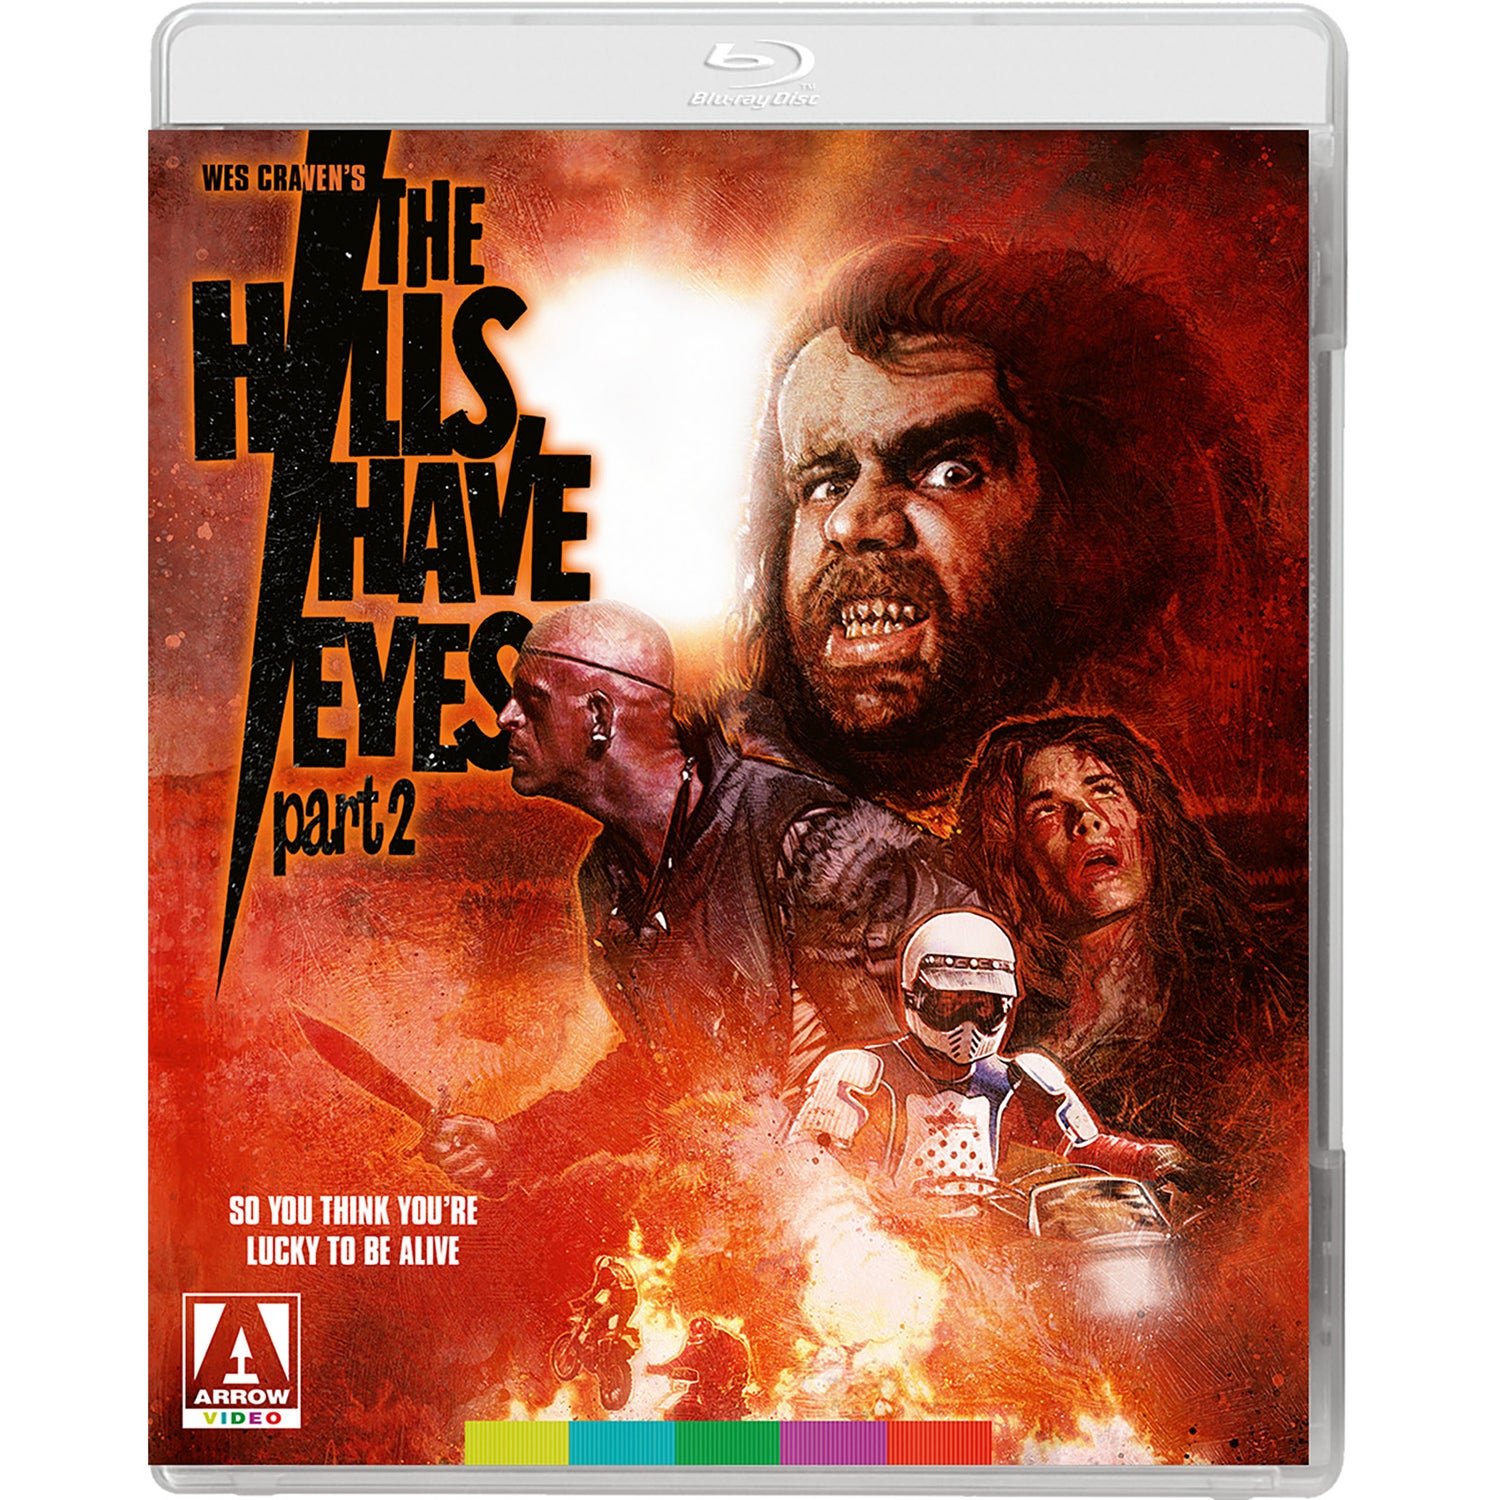 The Hills Have Eyes Part II Blu-ray